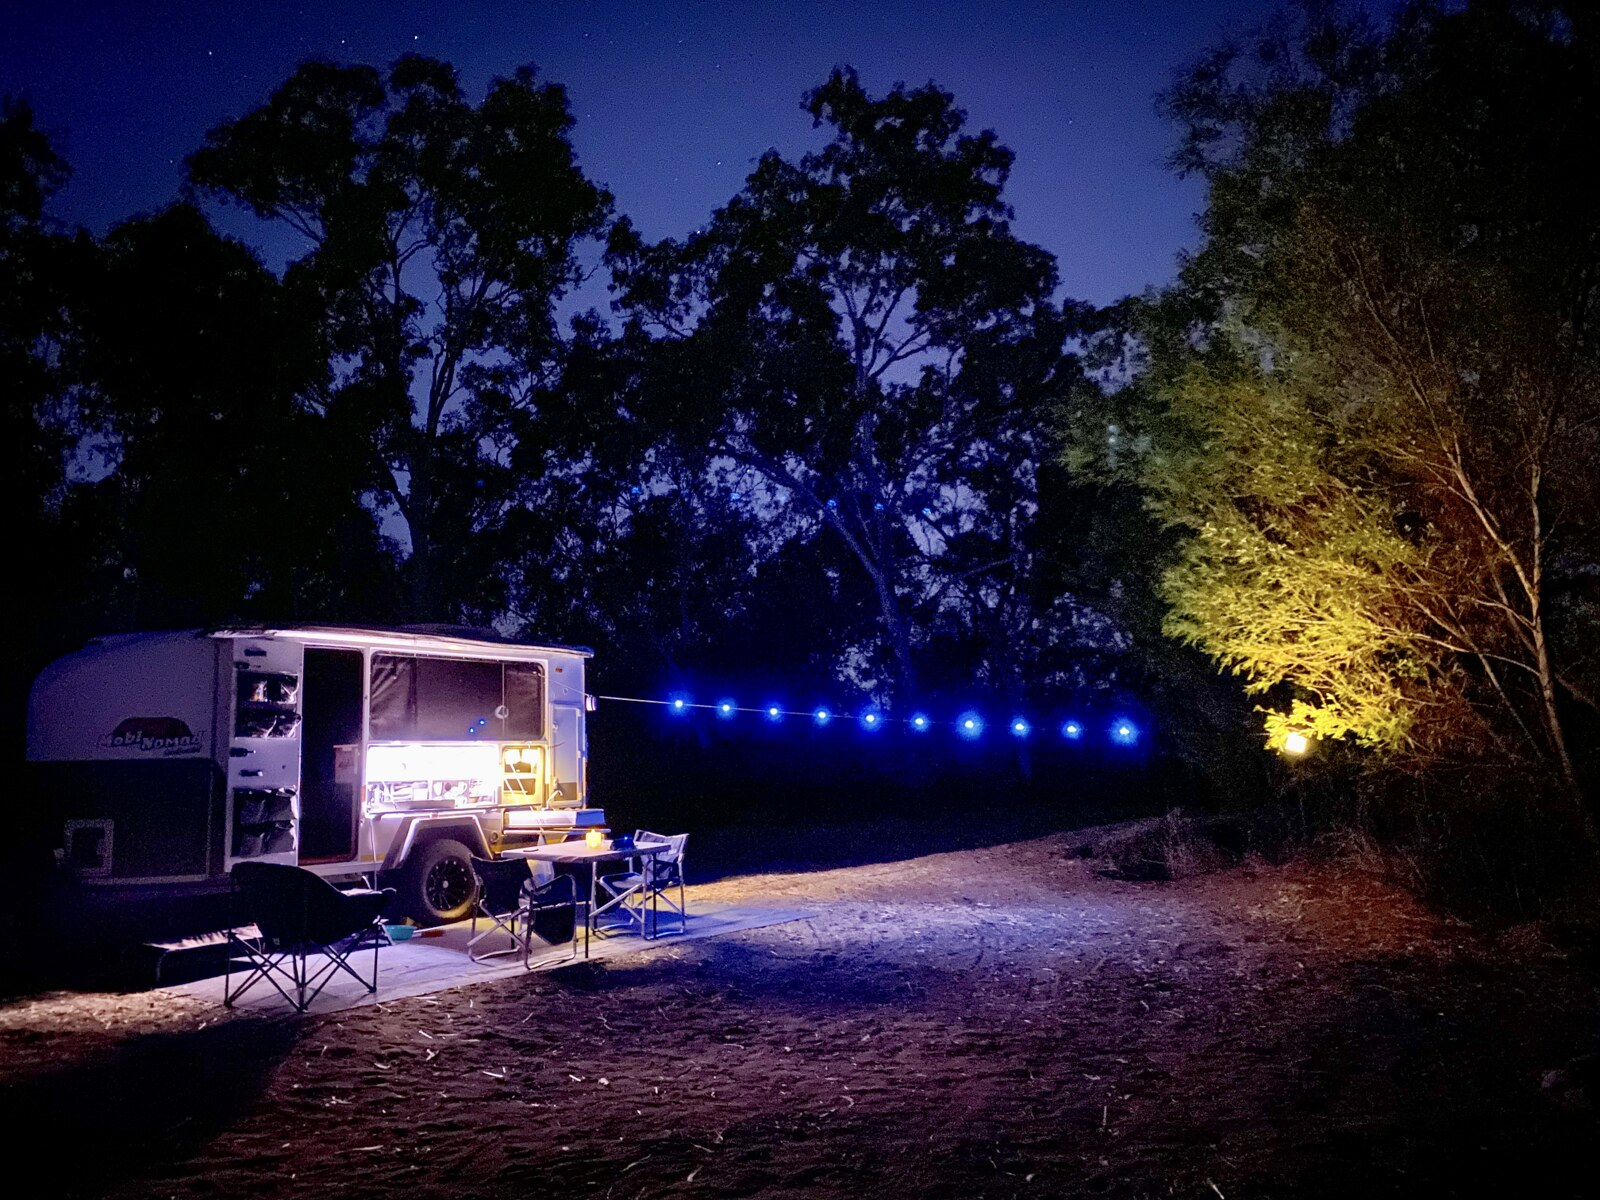 A Mobi-Nomad camper trailer set up for dinner under the stars with fairy lights strung from a tree